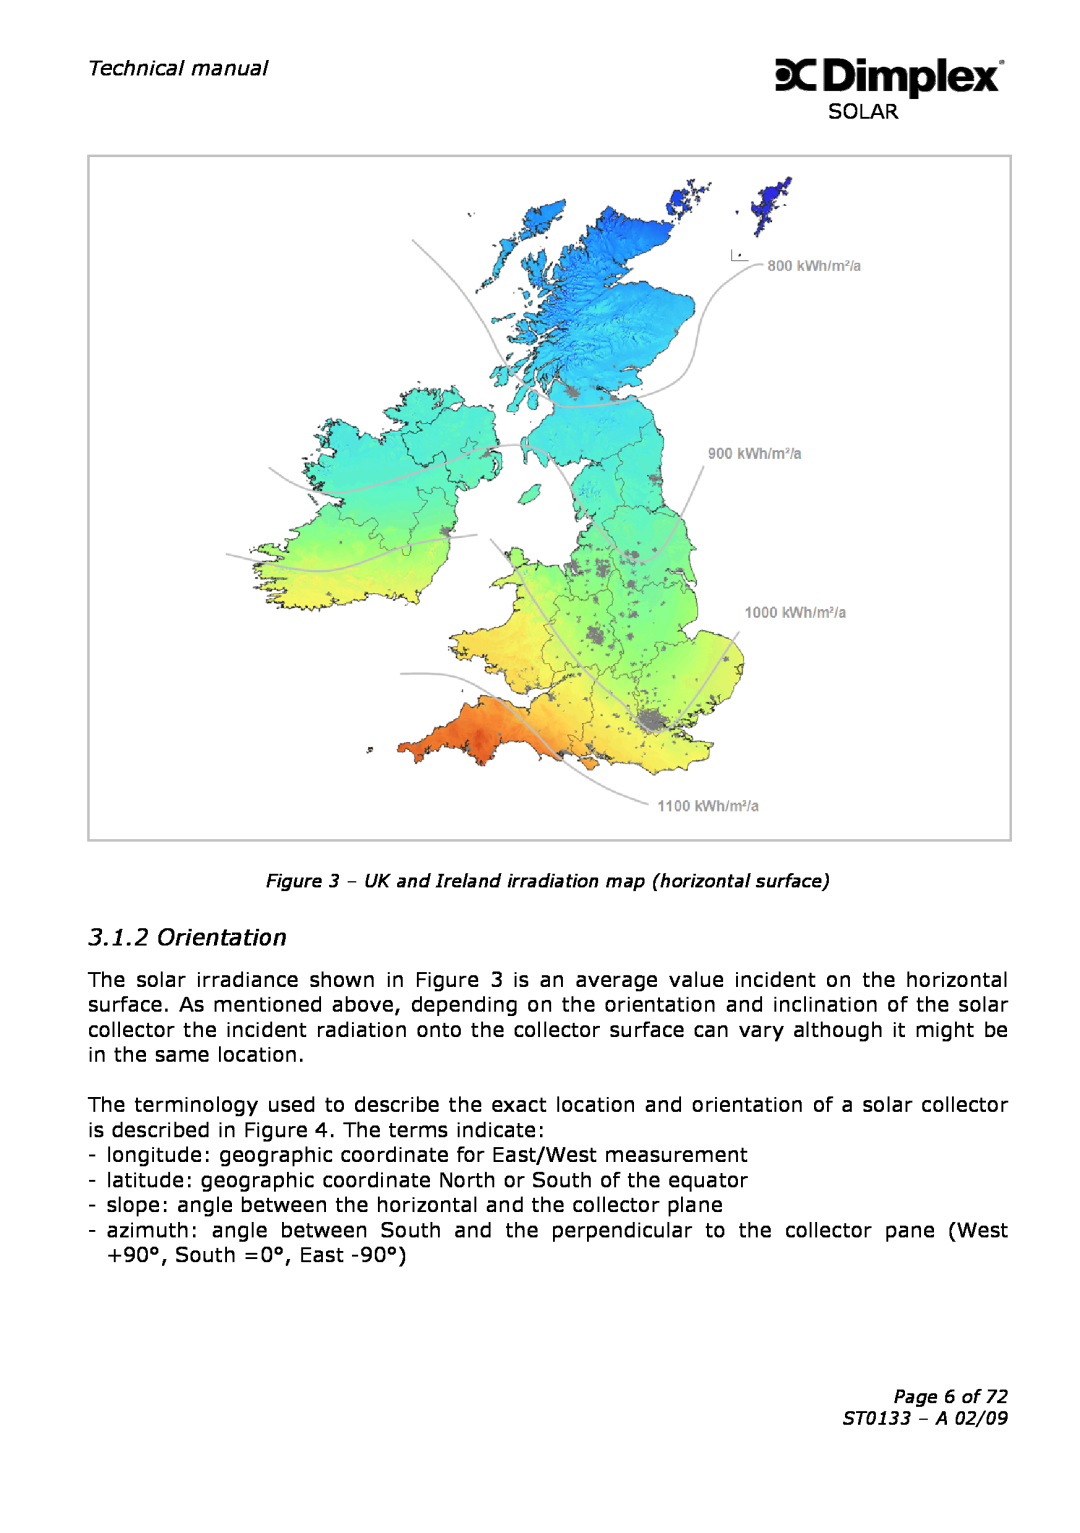 Dimplex technical manual Orientation, UK and Ireland irradiation map horizontal surface, Page 6 of ST0133 - A 02/09 